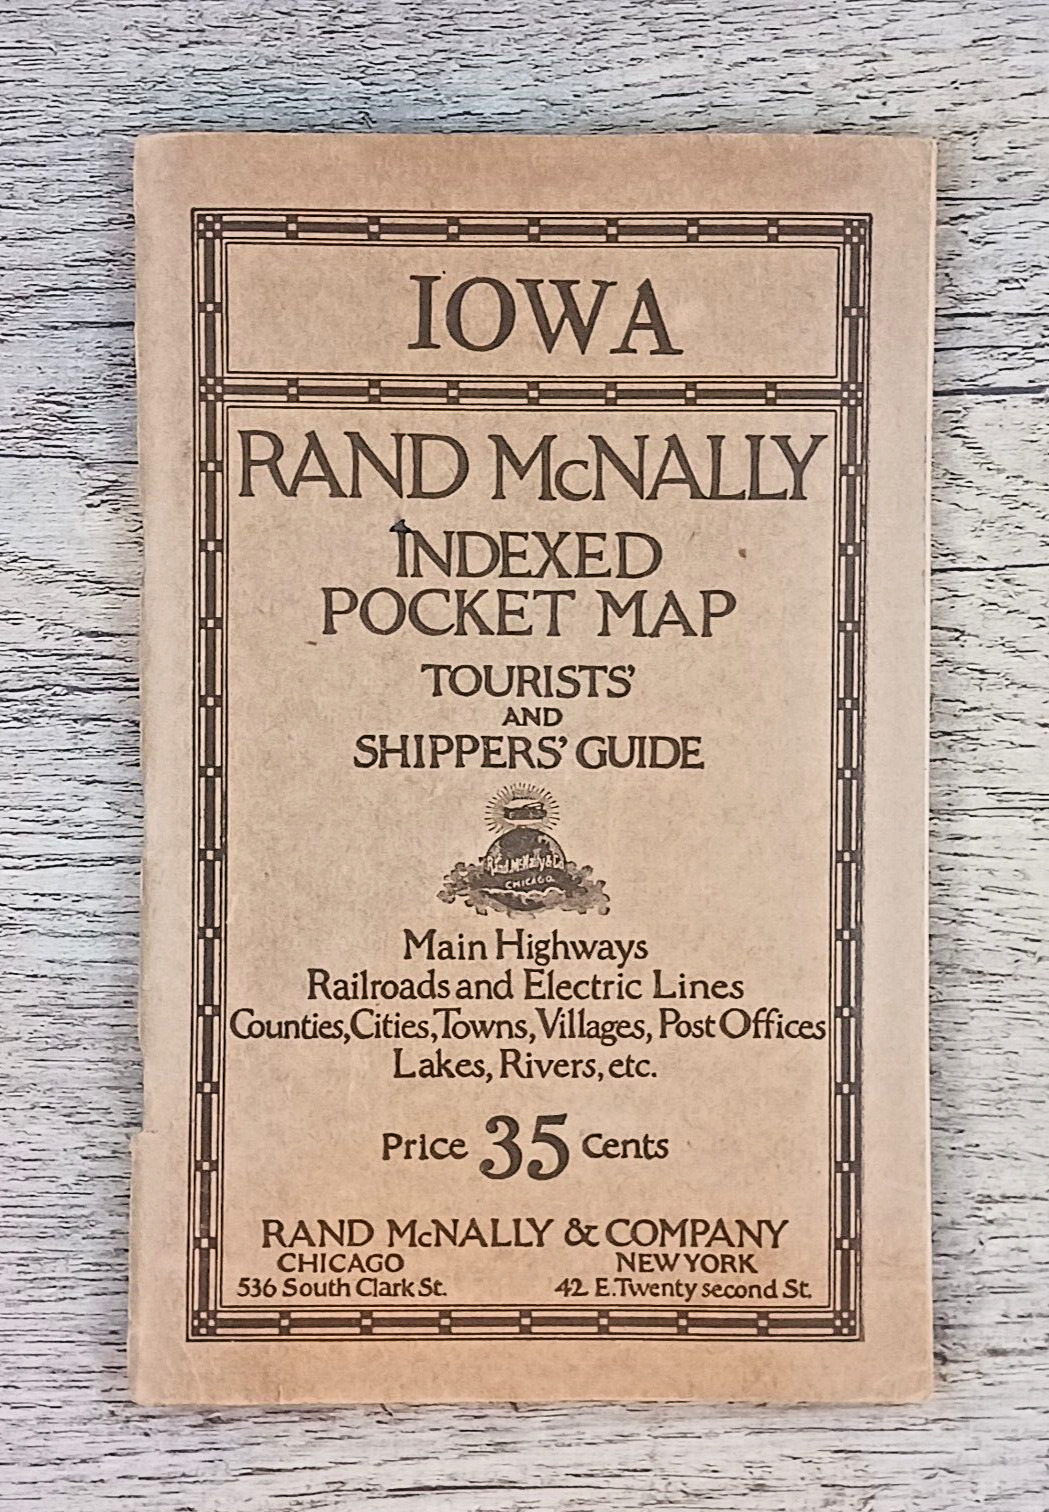 Vintage Rand McNally Iowa Indexed Pocket Map - Tourists' Shippers Guide - 1920